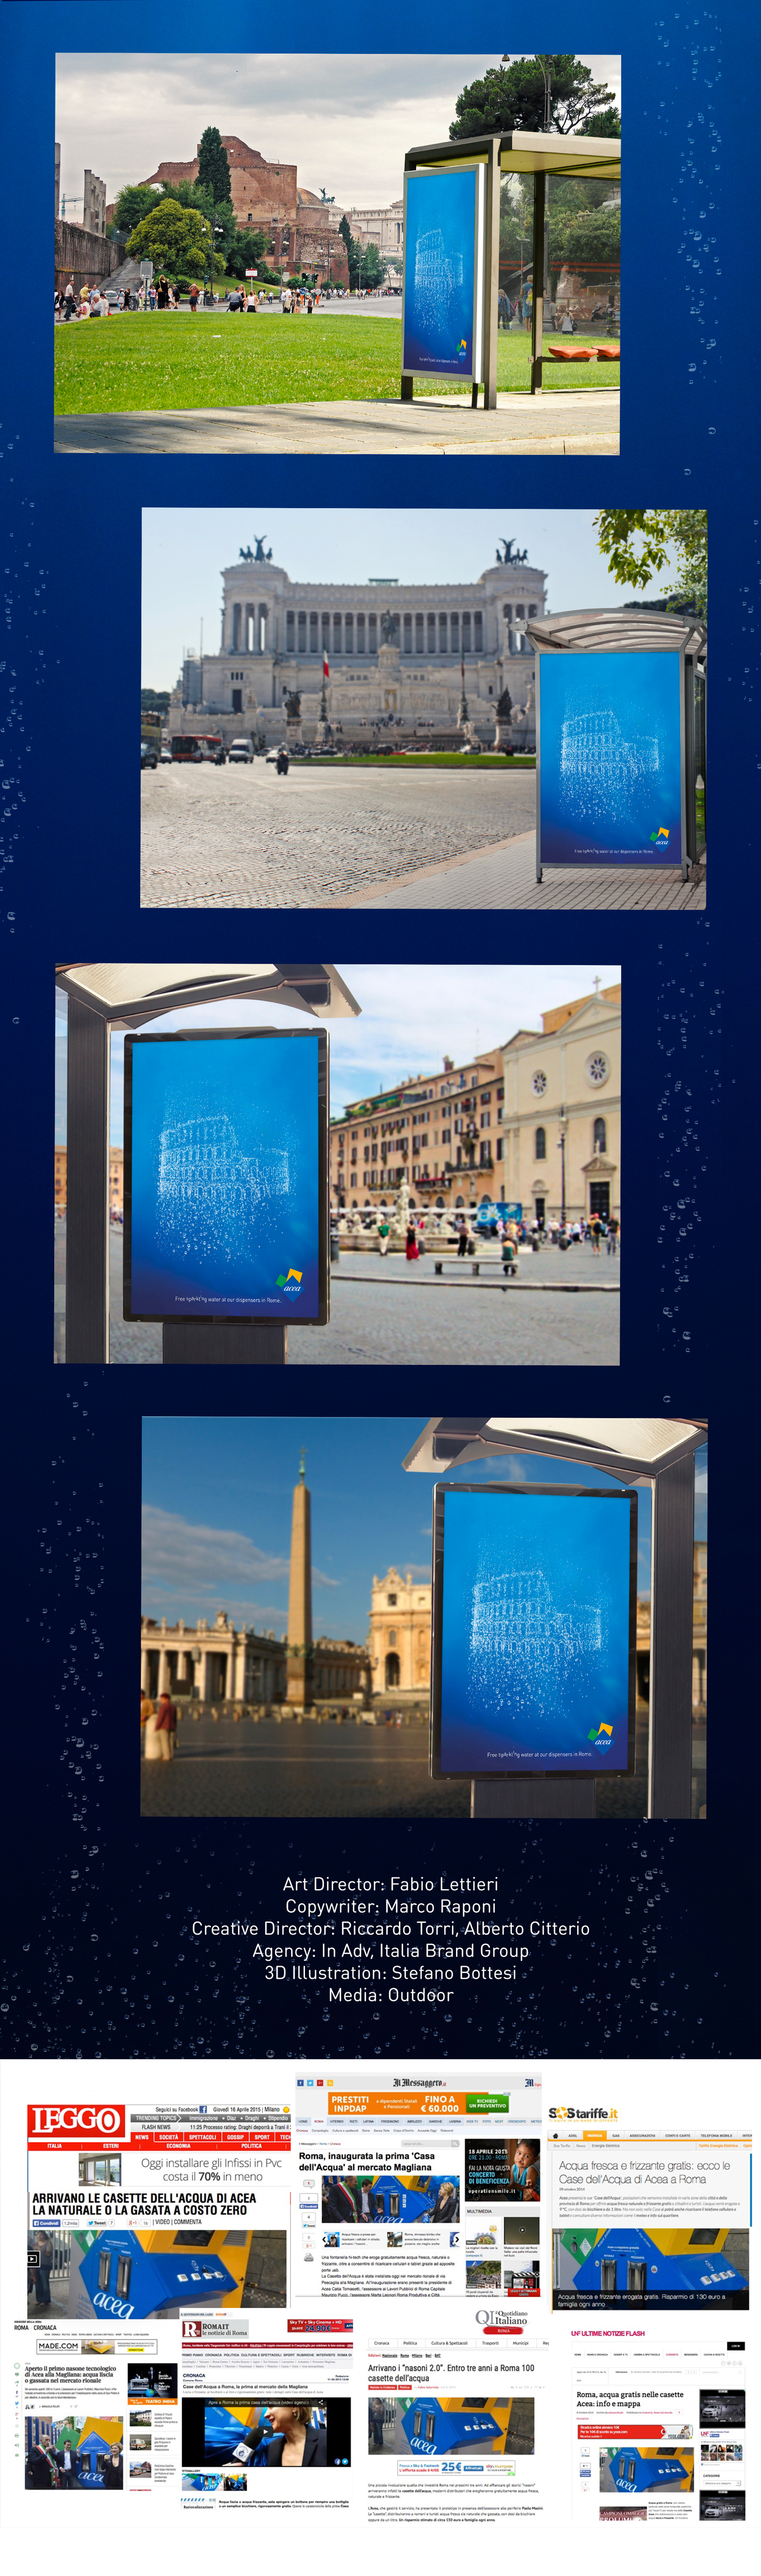 print Outdoor sparkling water coliseum